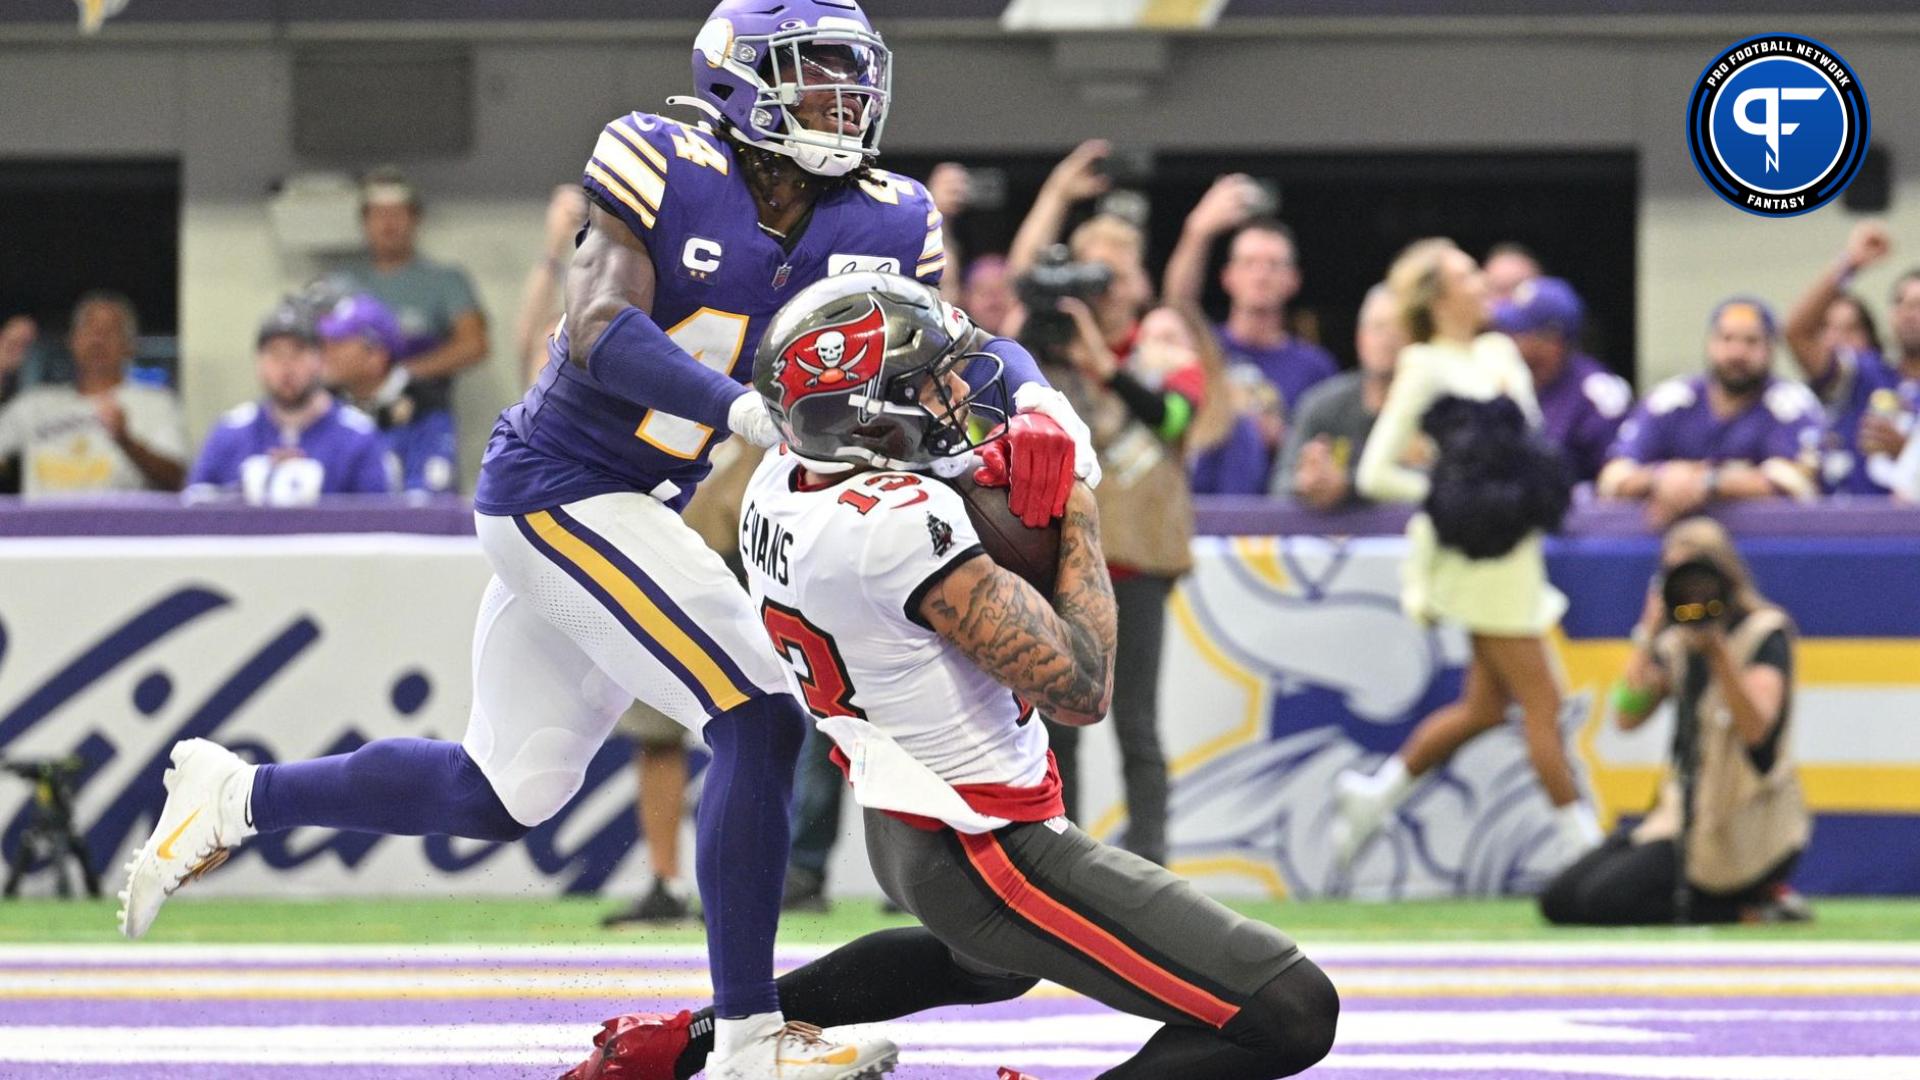 Tampa Bay Buccaneers receiver Mike Evans scores a touchdown in Week 1 against the Minnesota Vikings.